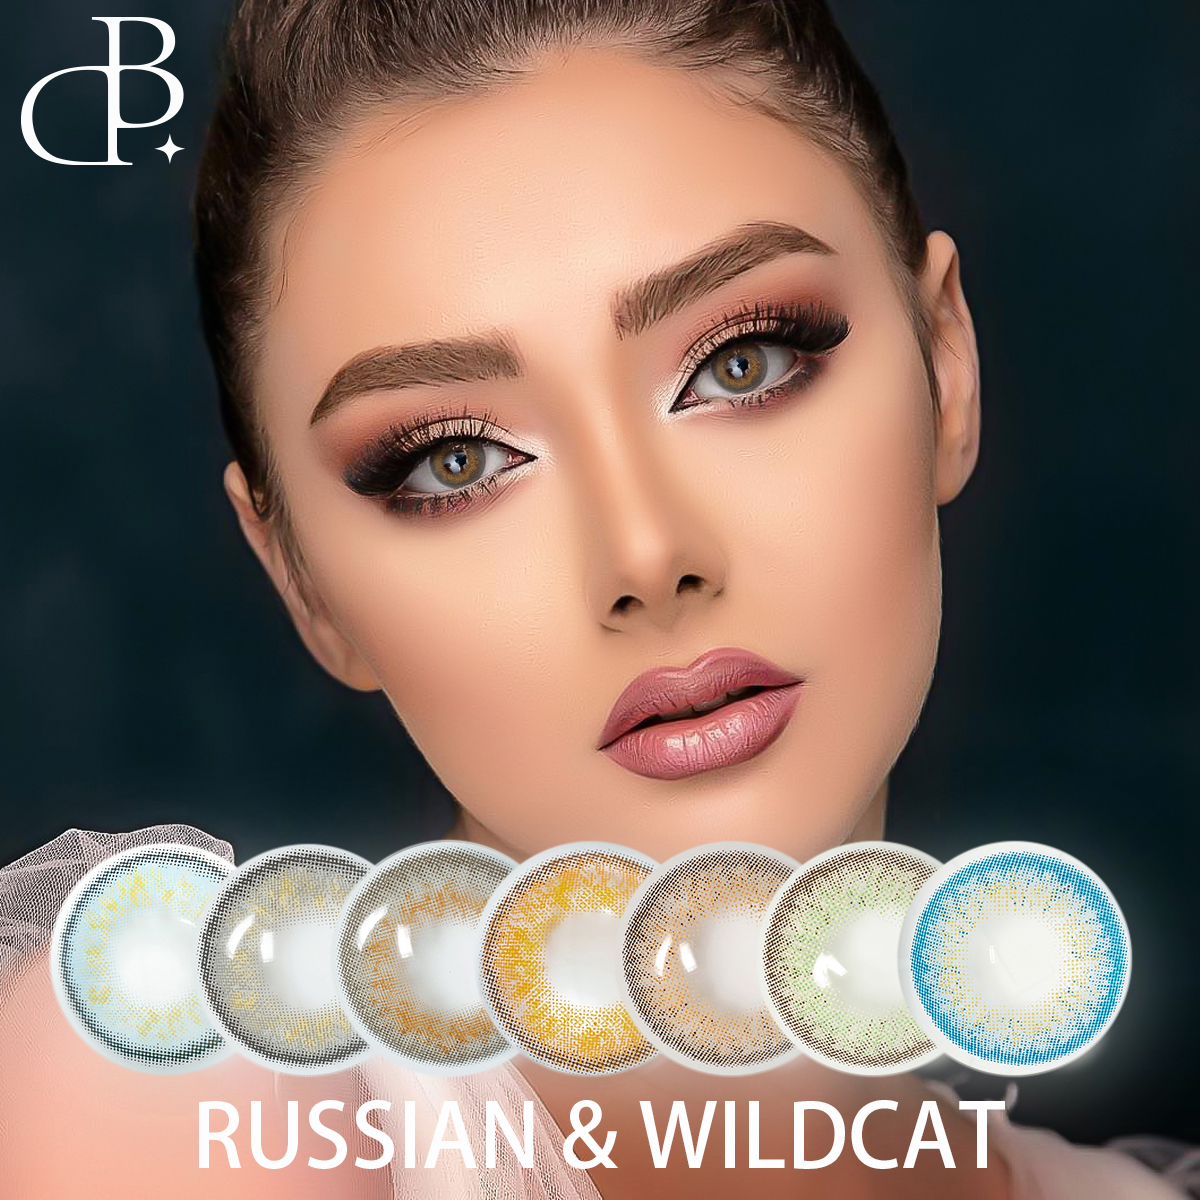 https://www.dblenses.com/russianwild-cat-natural-Colored-eye-lenses-wholesale-soft-Colors-contact-lenses-prescription-contact-lenses-free-shipping-product/